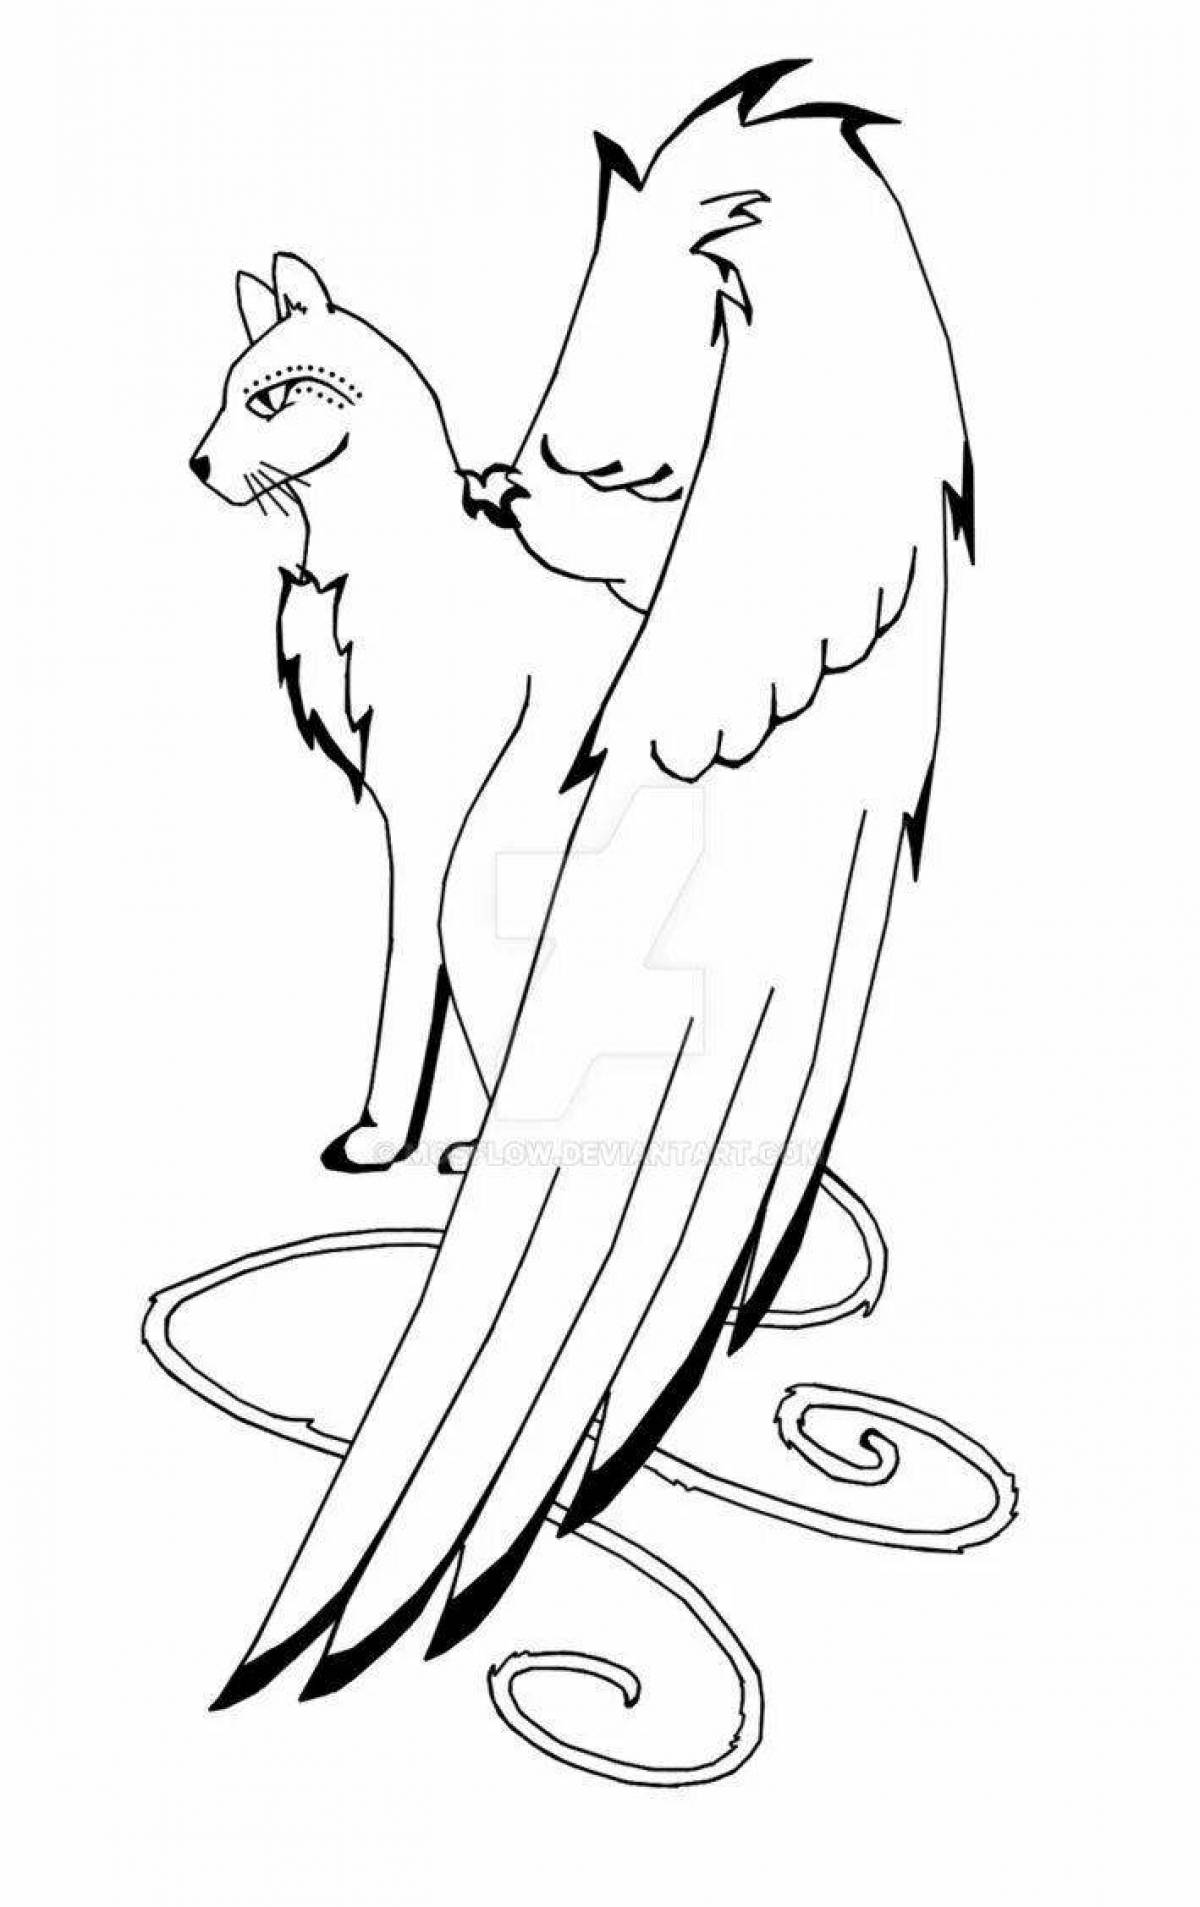 Gorgeous flying cat coloring page